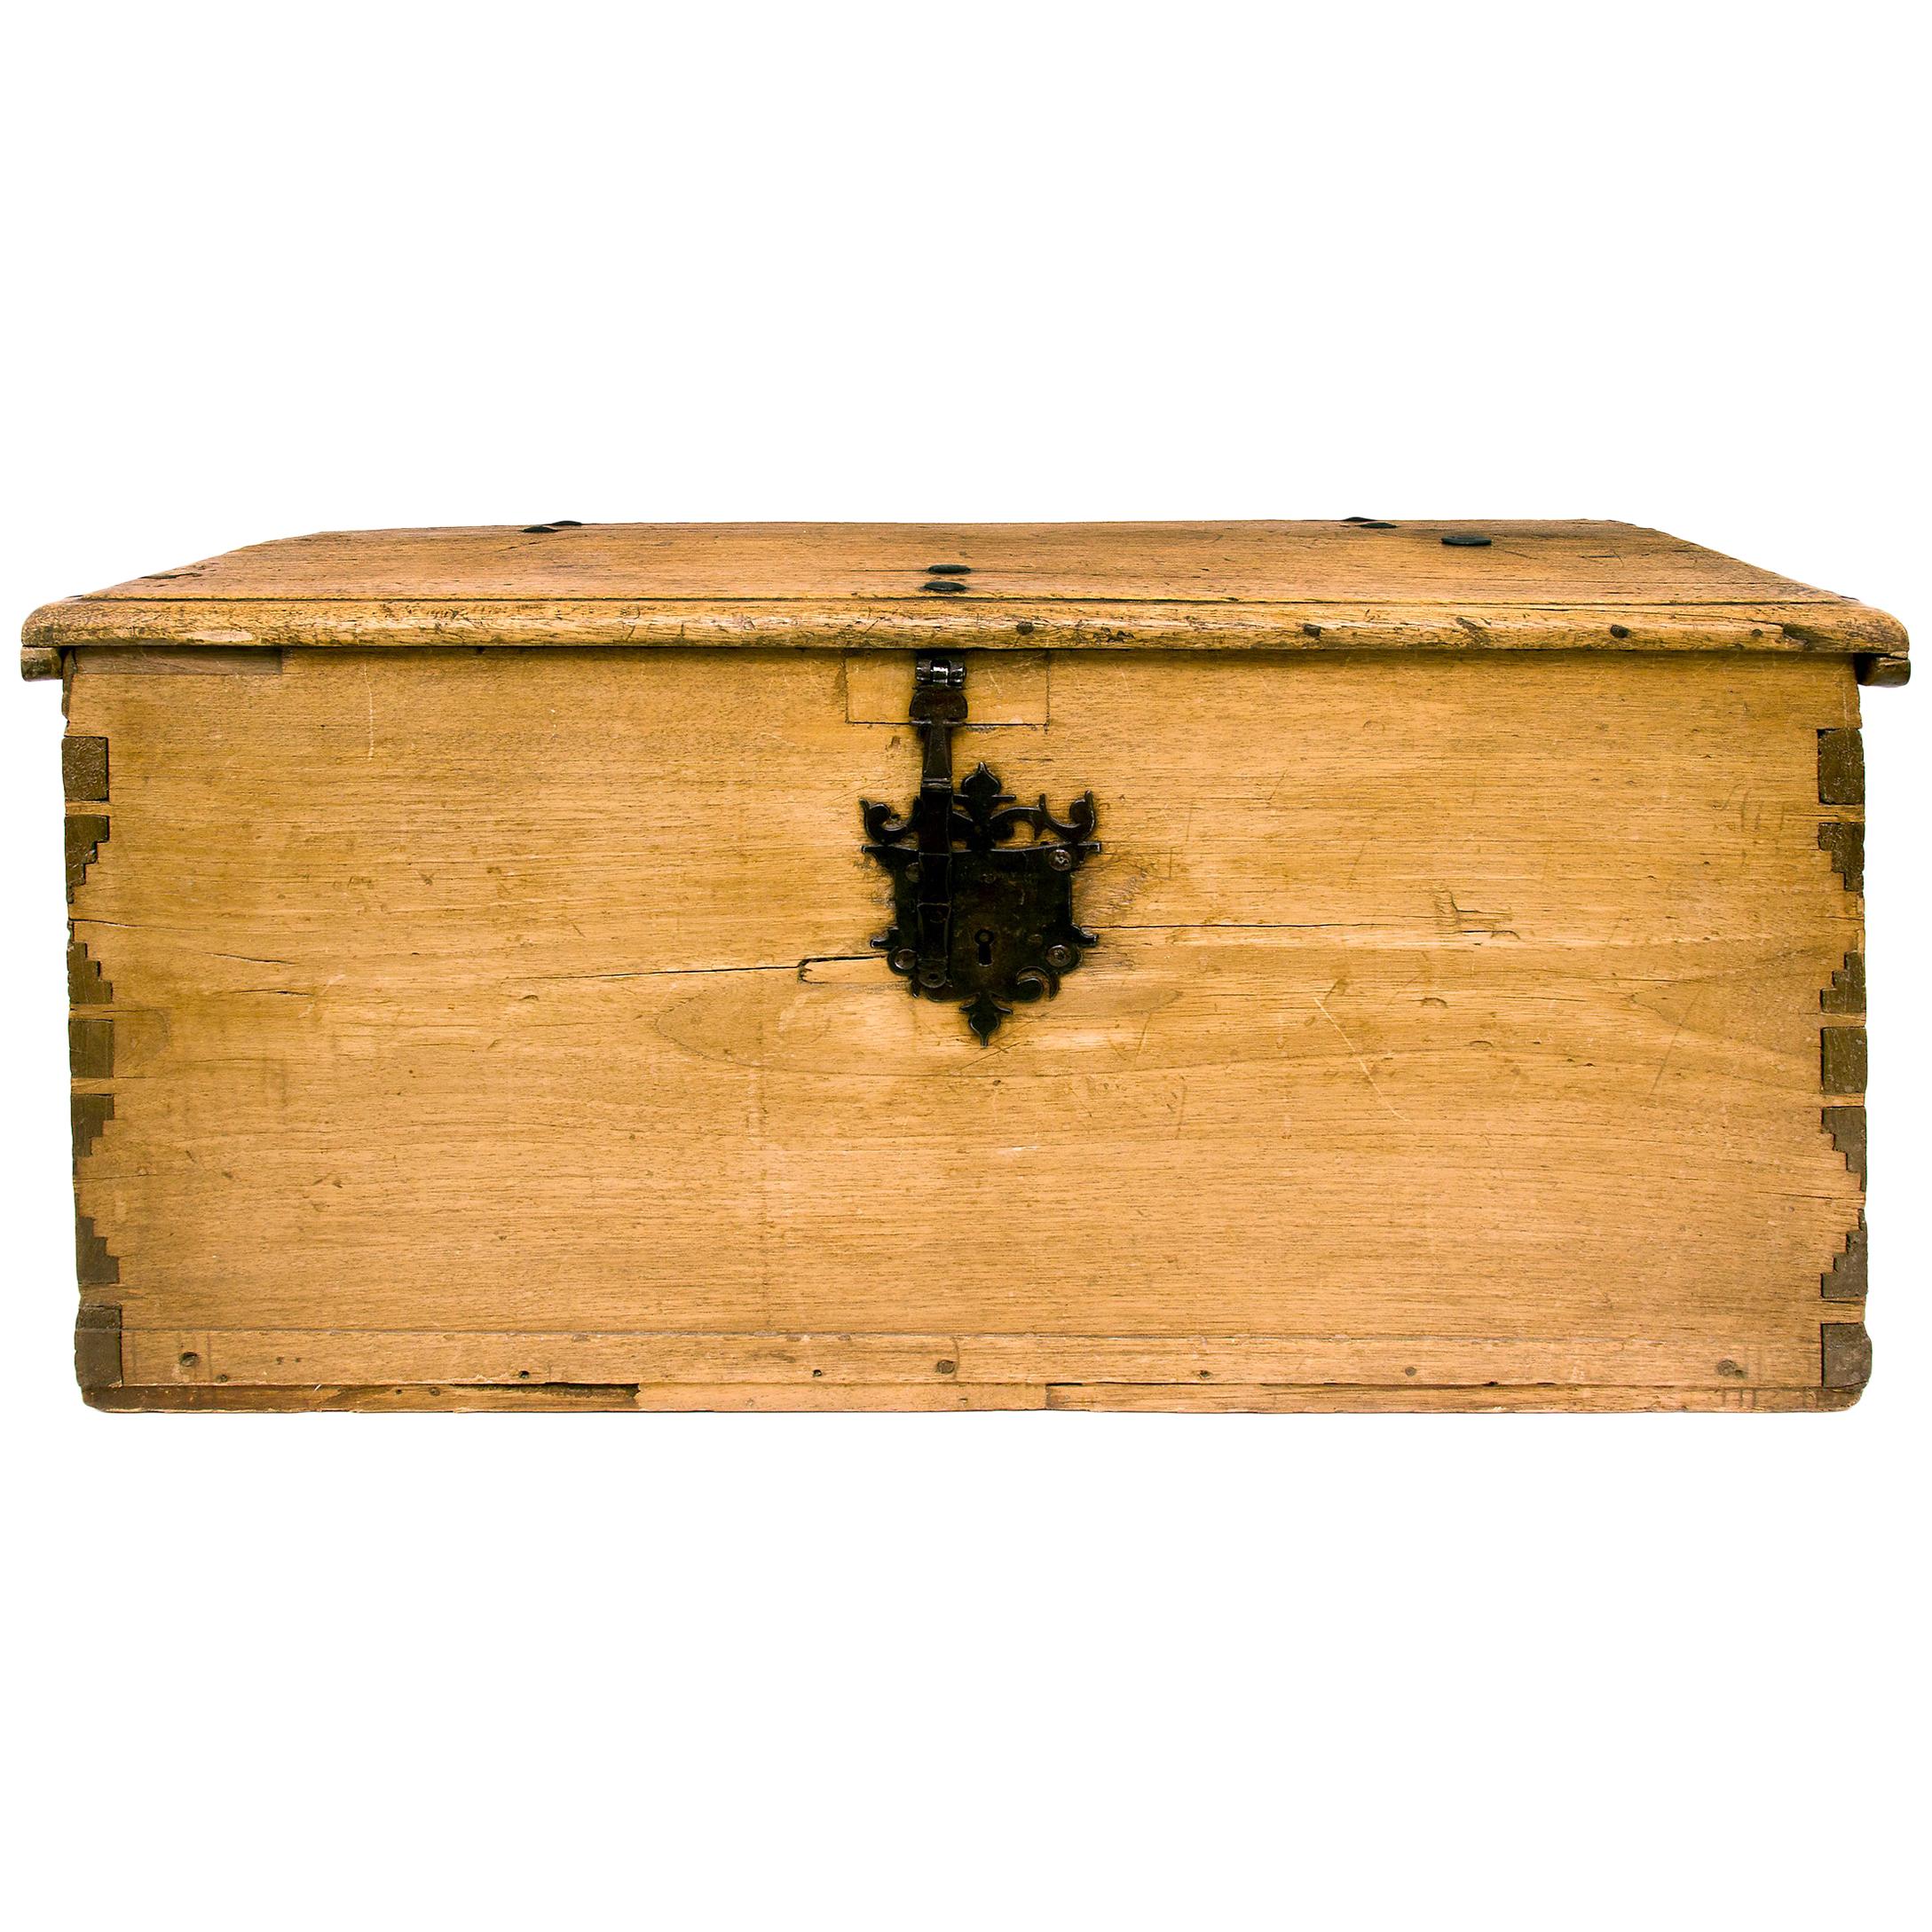 New Mexican Chest, circa 1840-1860, Spanish Colonial, Wood, Iron, Dovetail Joint